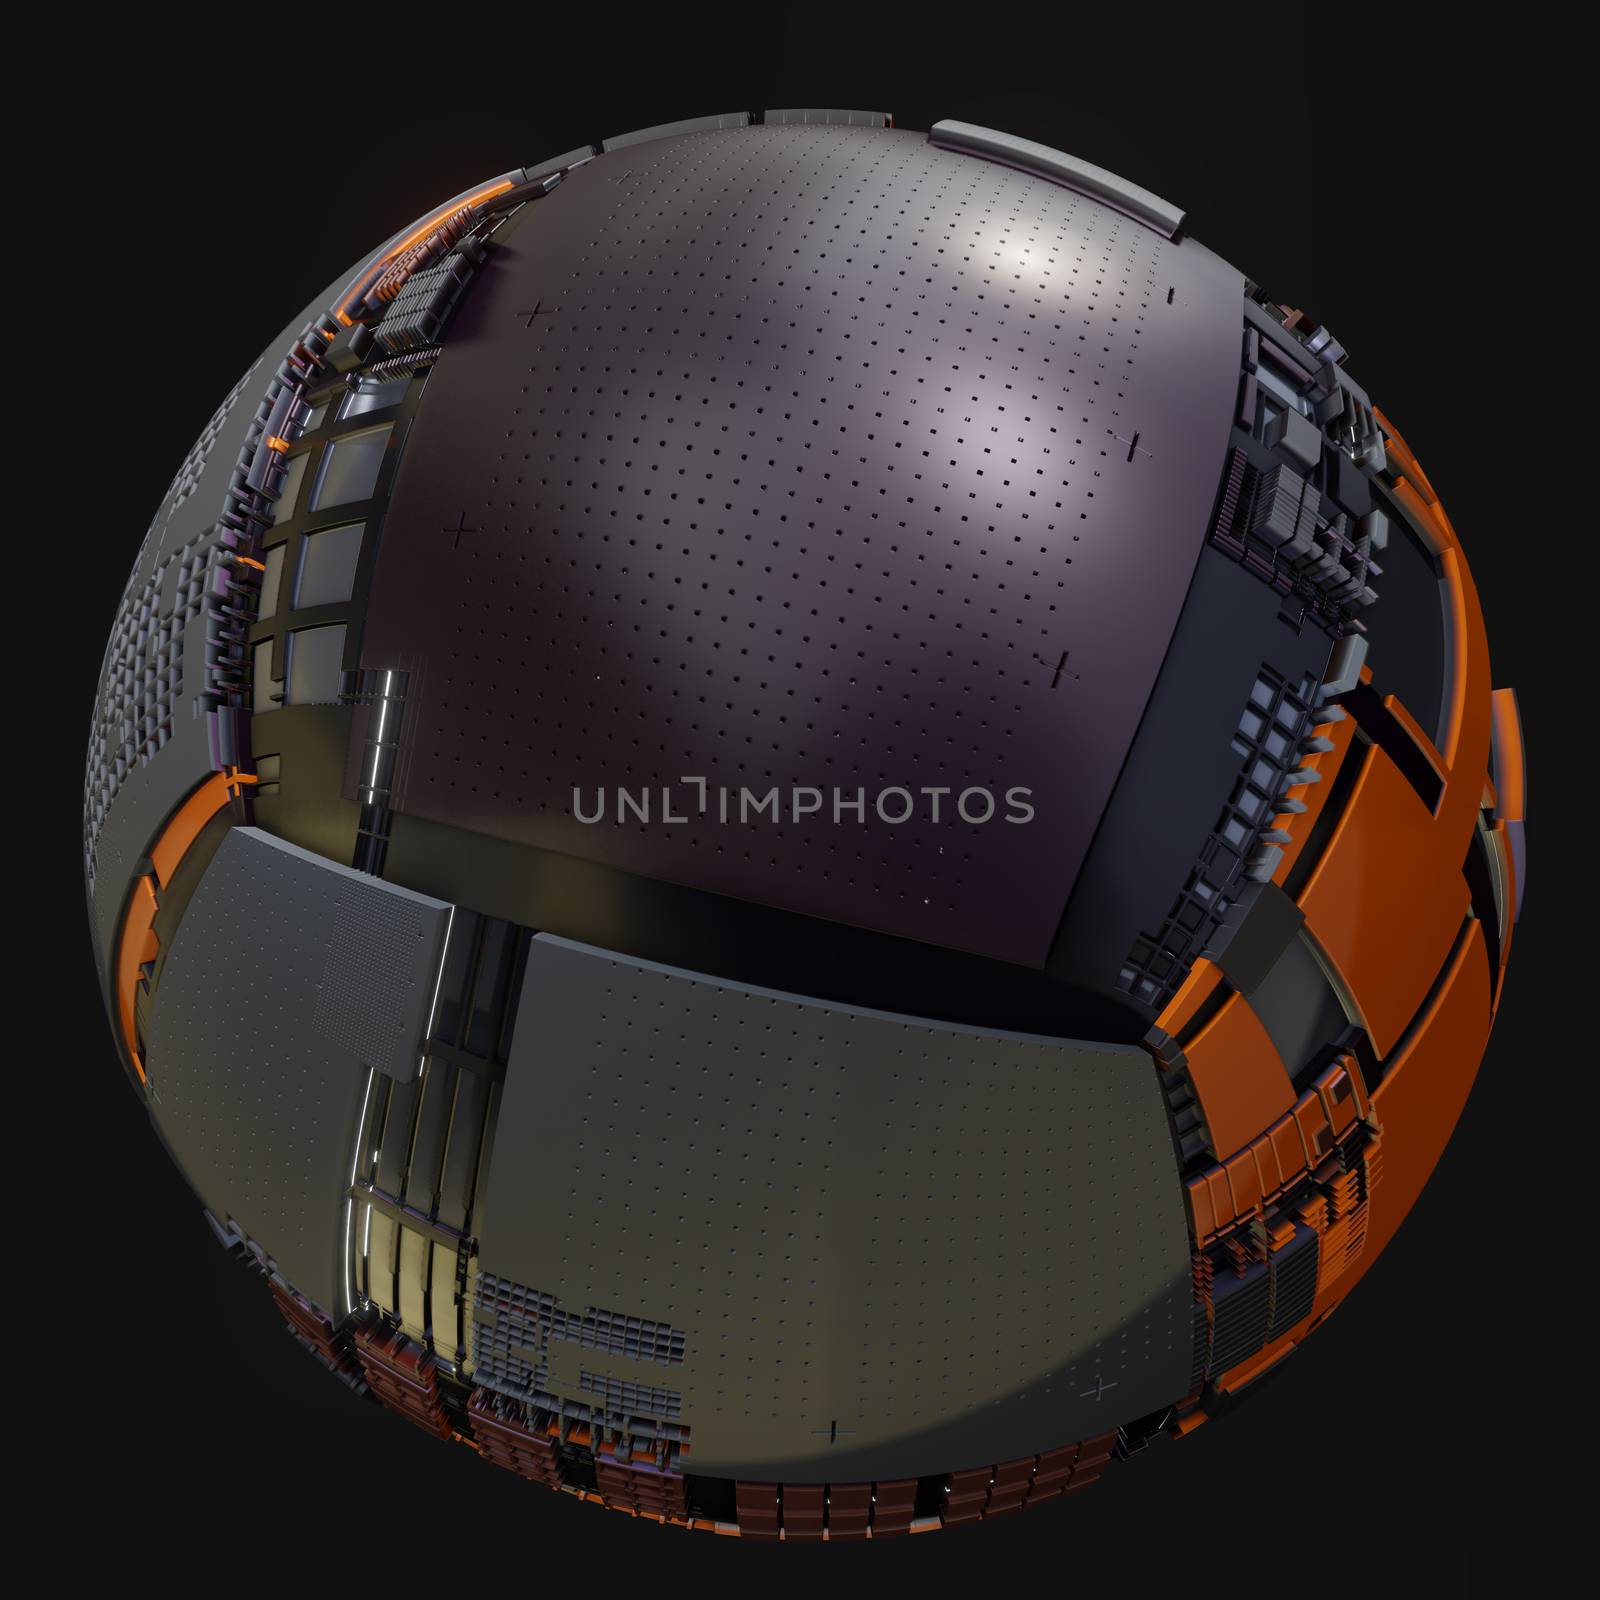 Abstract Hardsurface Sci-Fi Technology Sphere. Space Station Or Spaceship. 3D renderingor 3D illustration. Isolate on Drak background